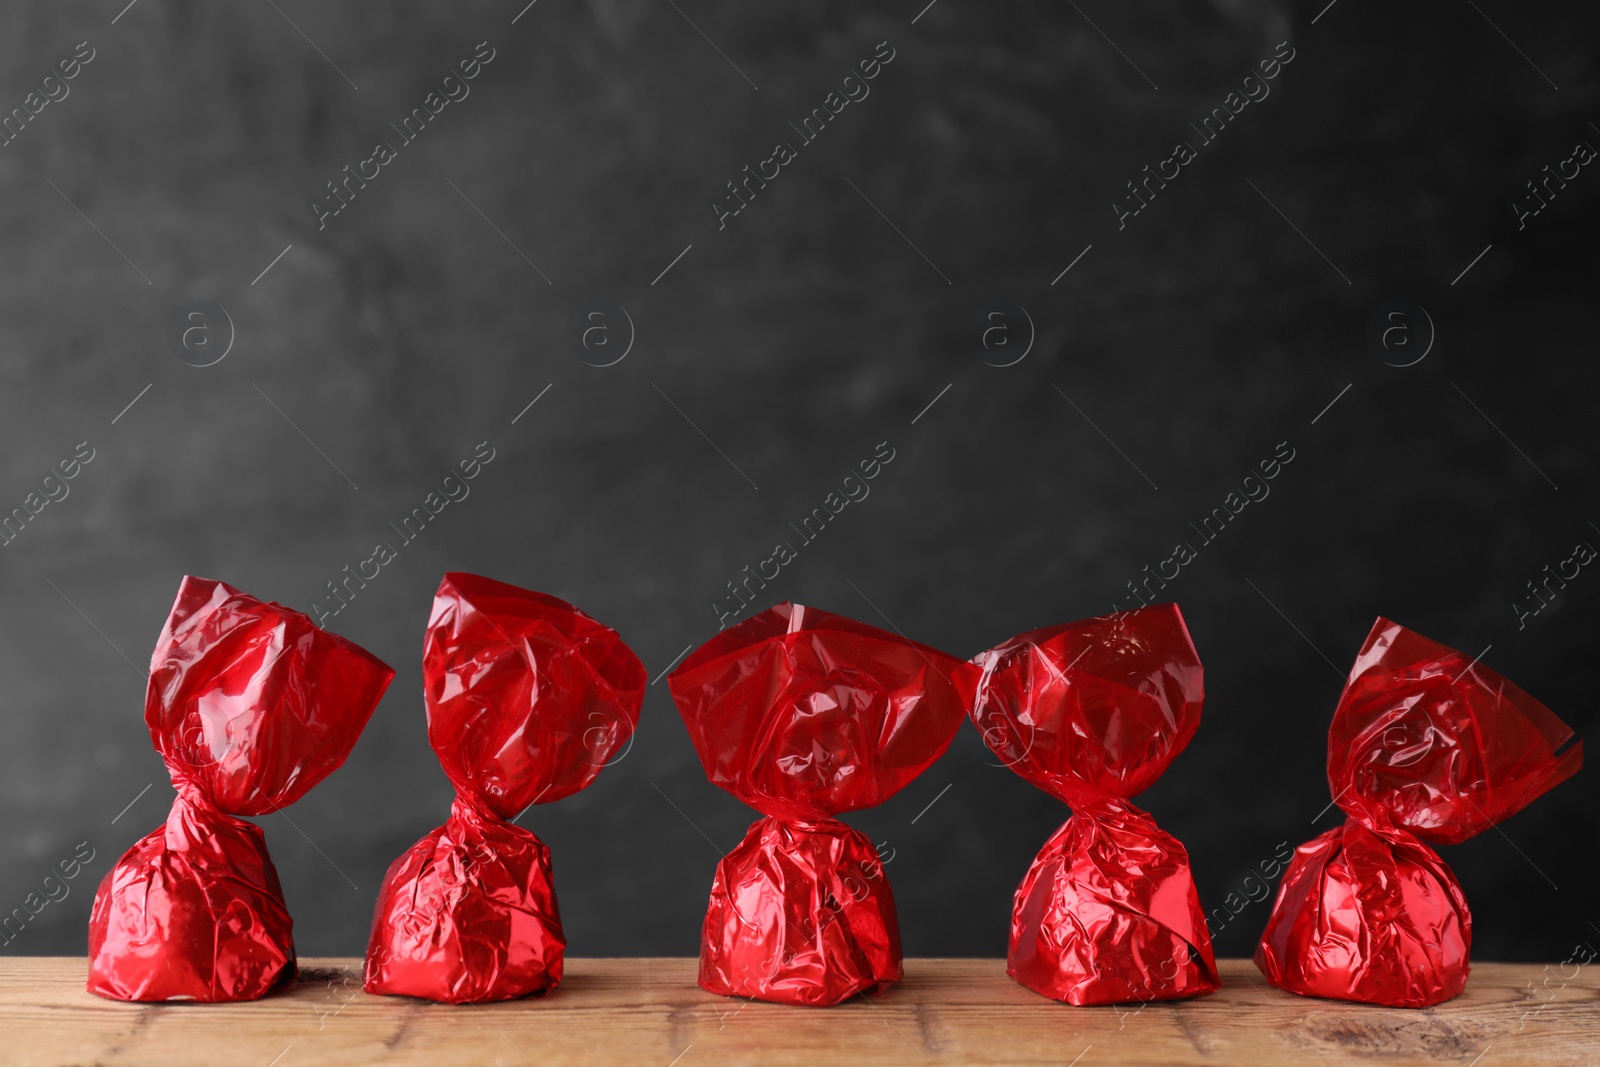 Photo of Delicious chocolate candies in red wrappers on wooden table